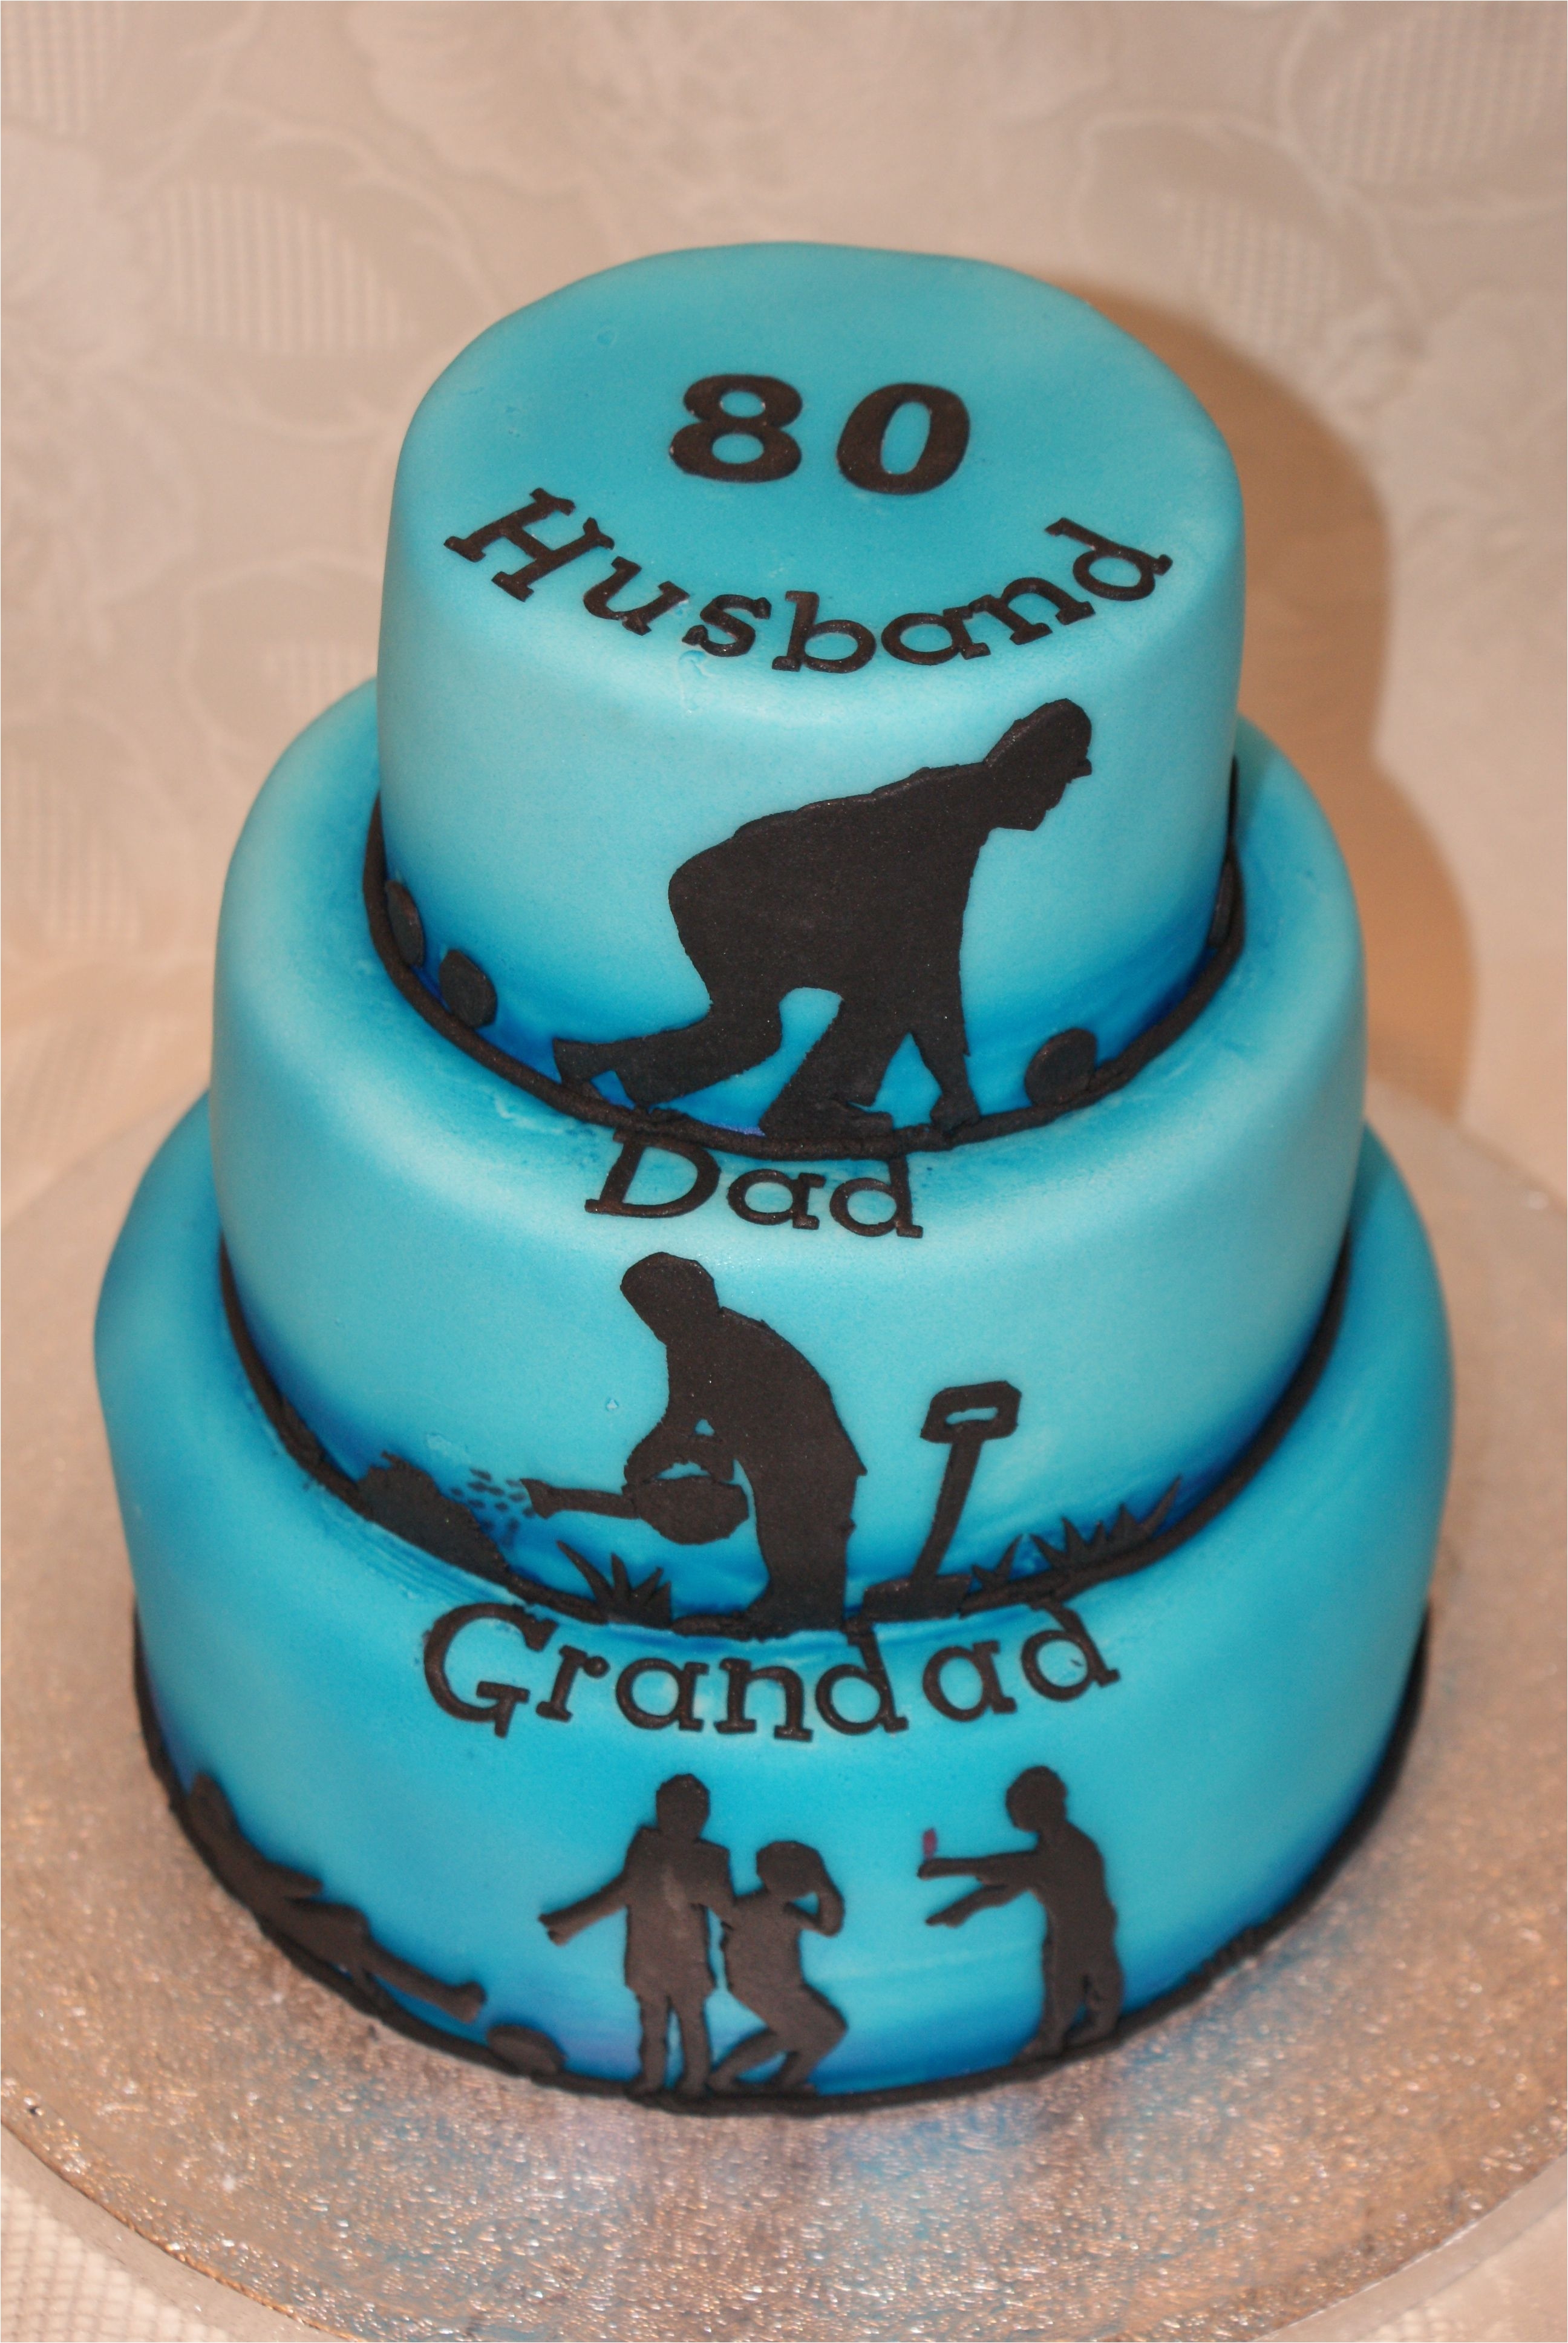 80th birthday cake husband dad grandad tiered cake with lawn bowls gardening and football silhouettes